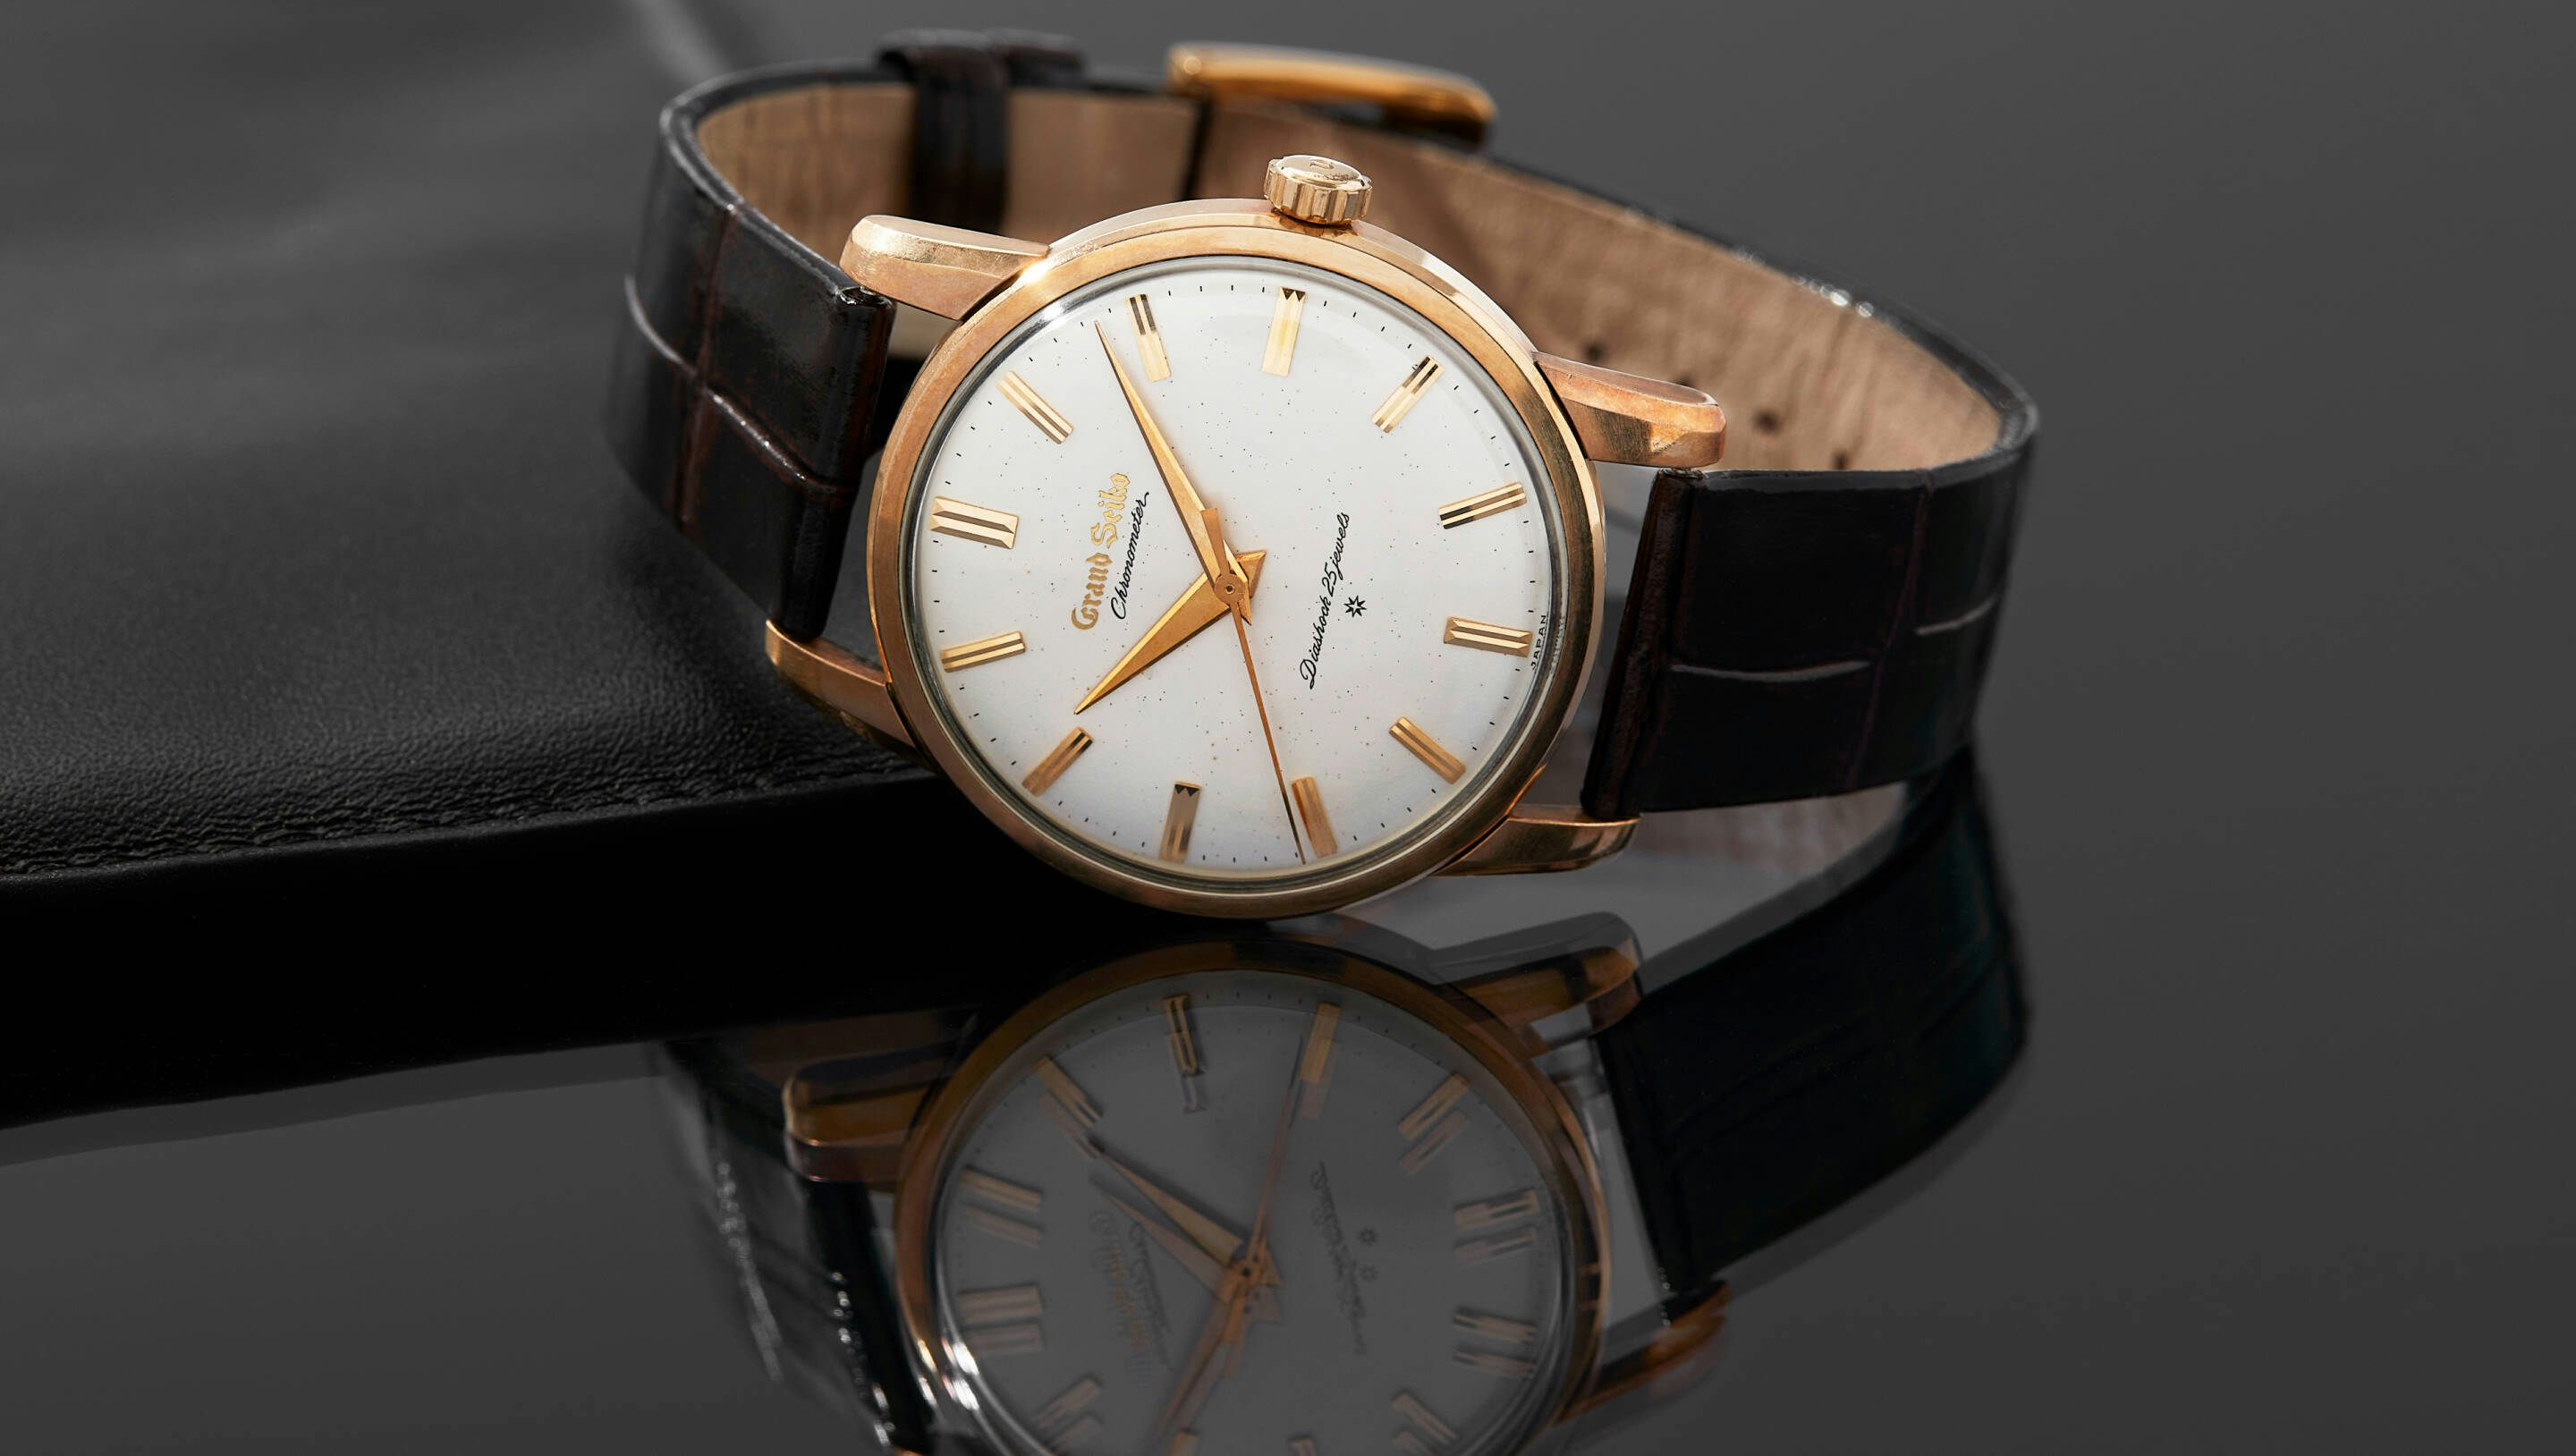 Making The Case: The First Grand Seiko - Hodinkee